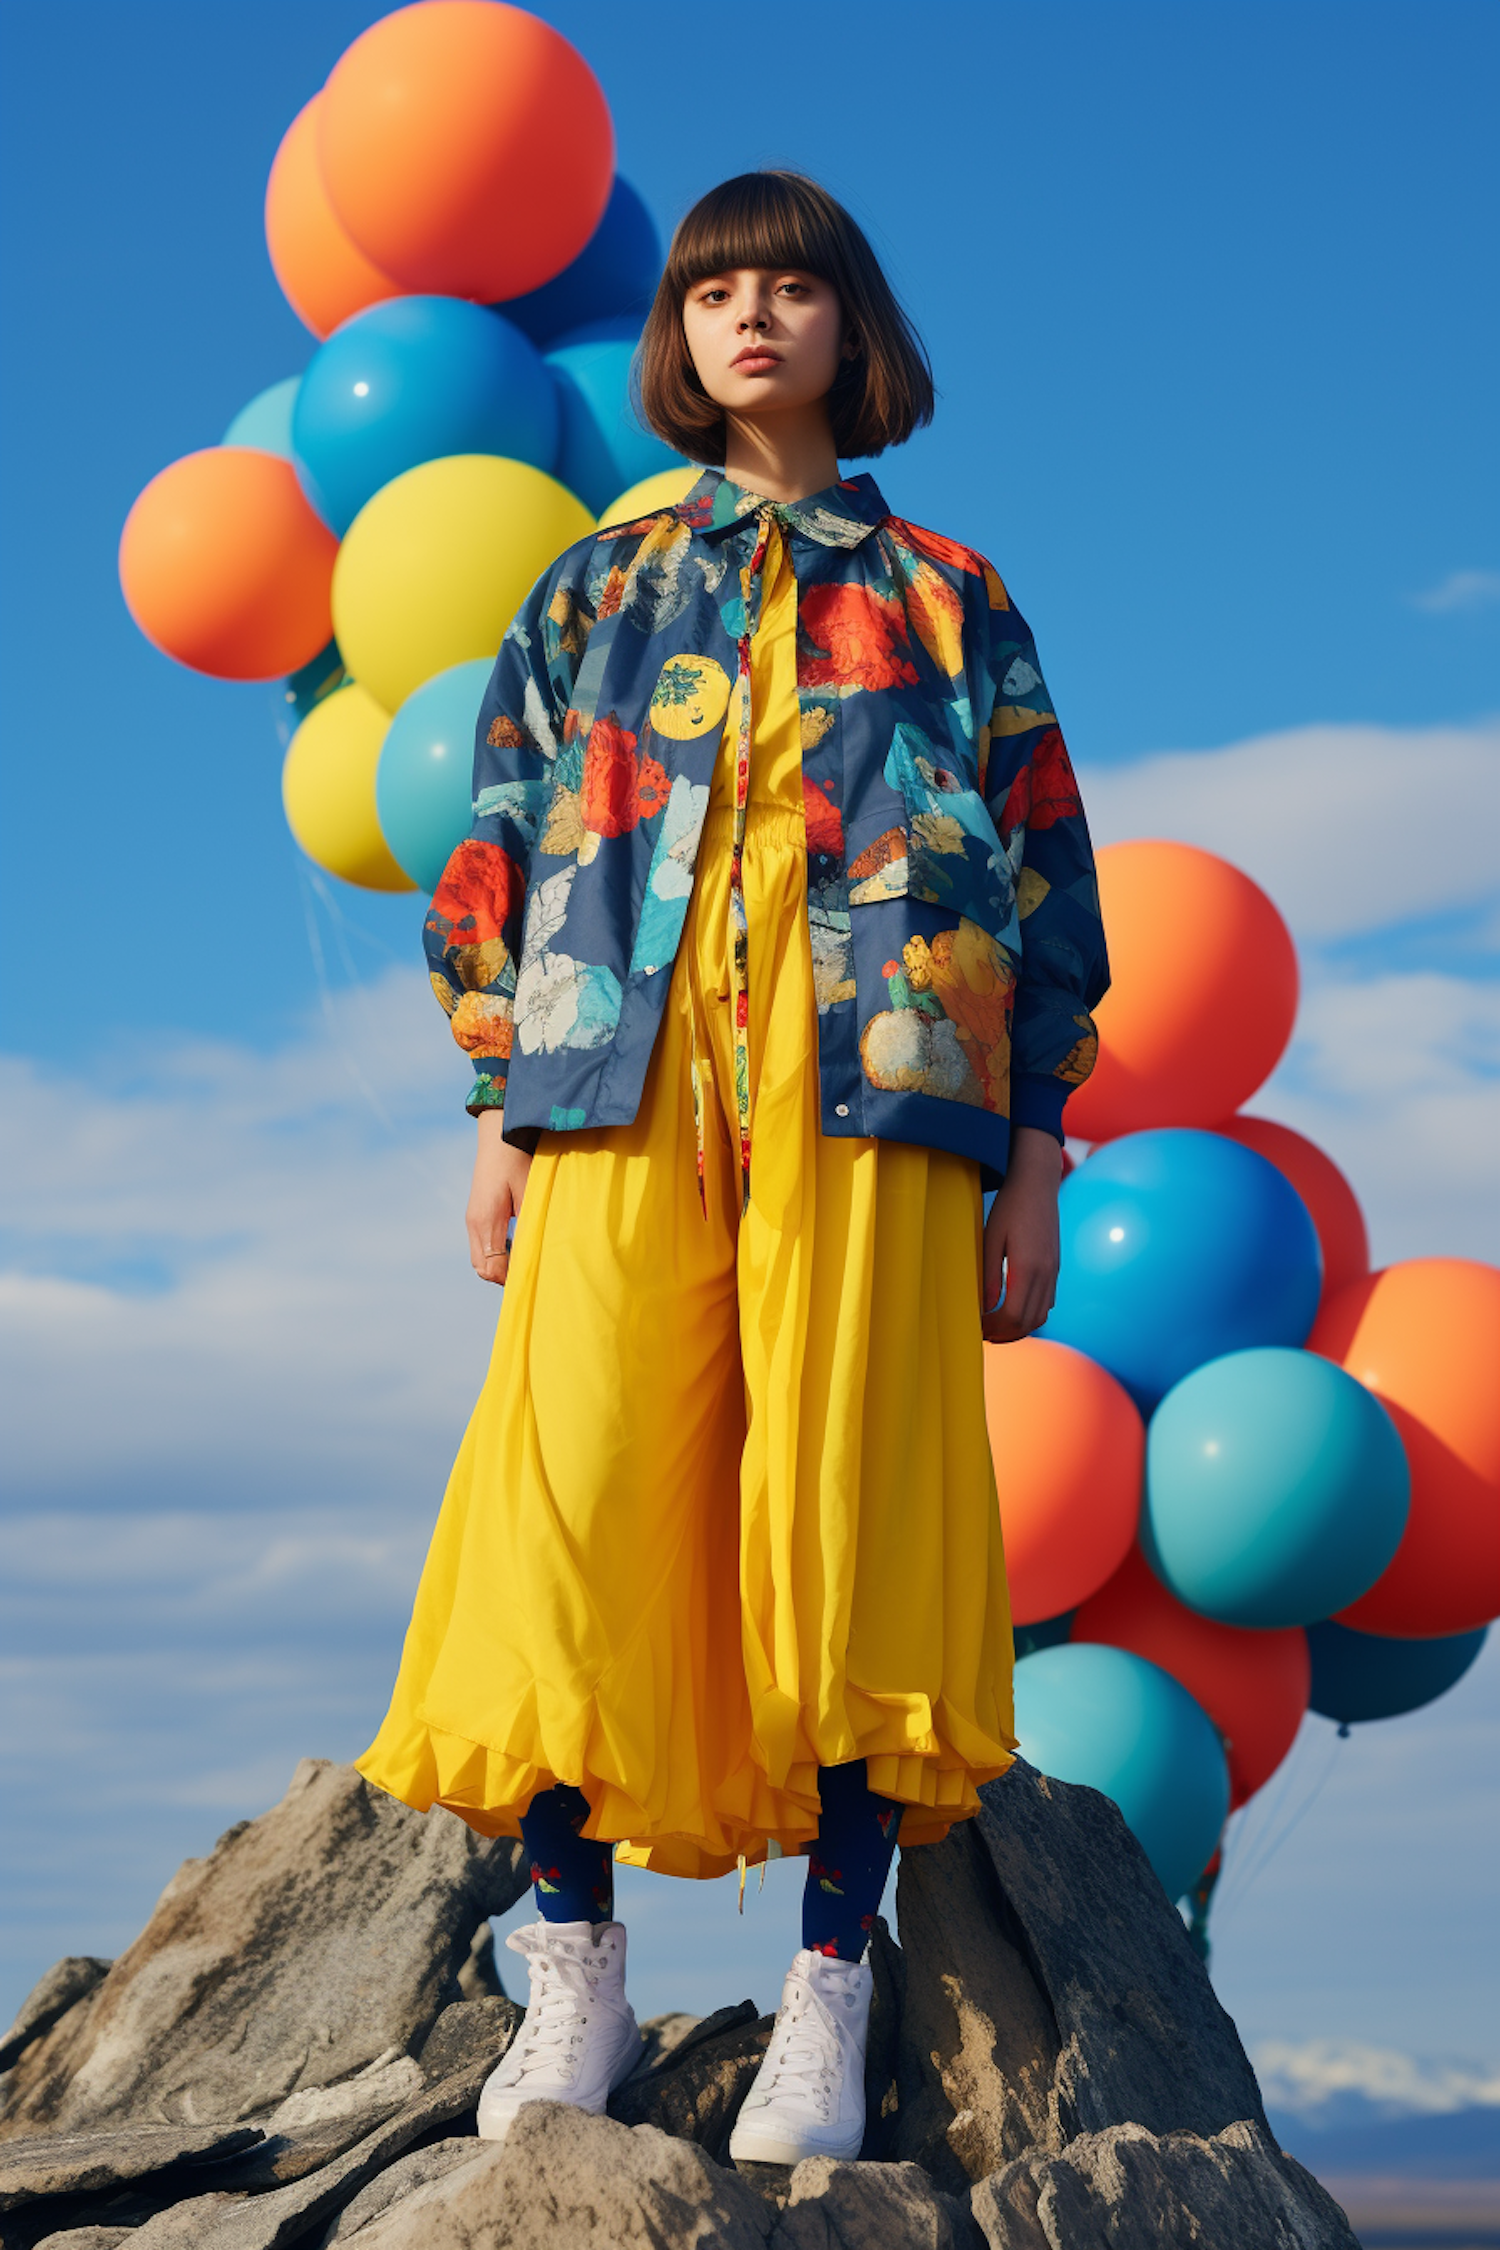 Vibrant Serenity - A Young Woman with Balloons Against the Blue Sky